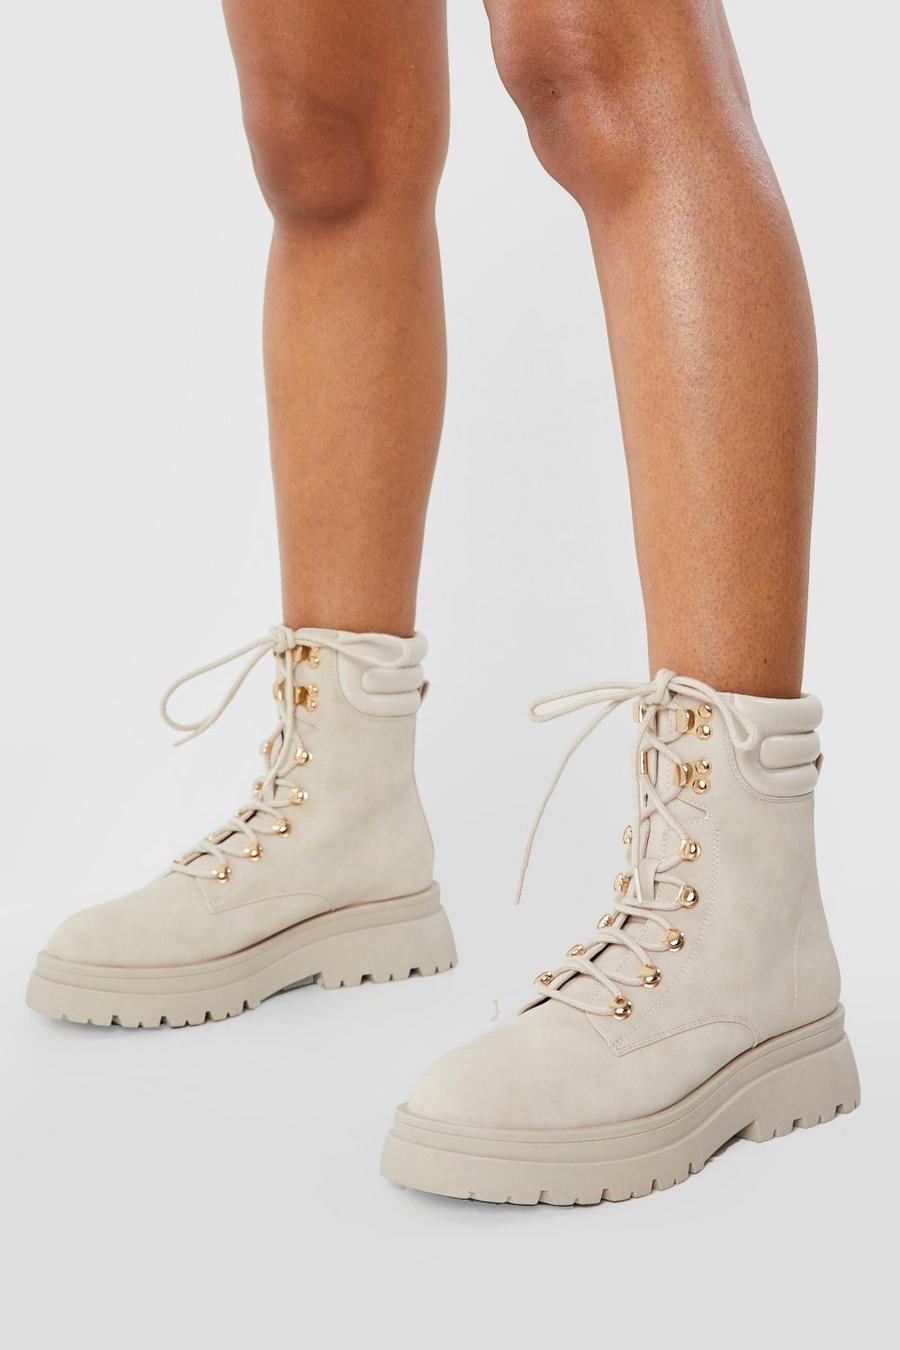 Beige Cleated Sole Lace Up Hiker Boots